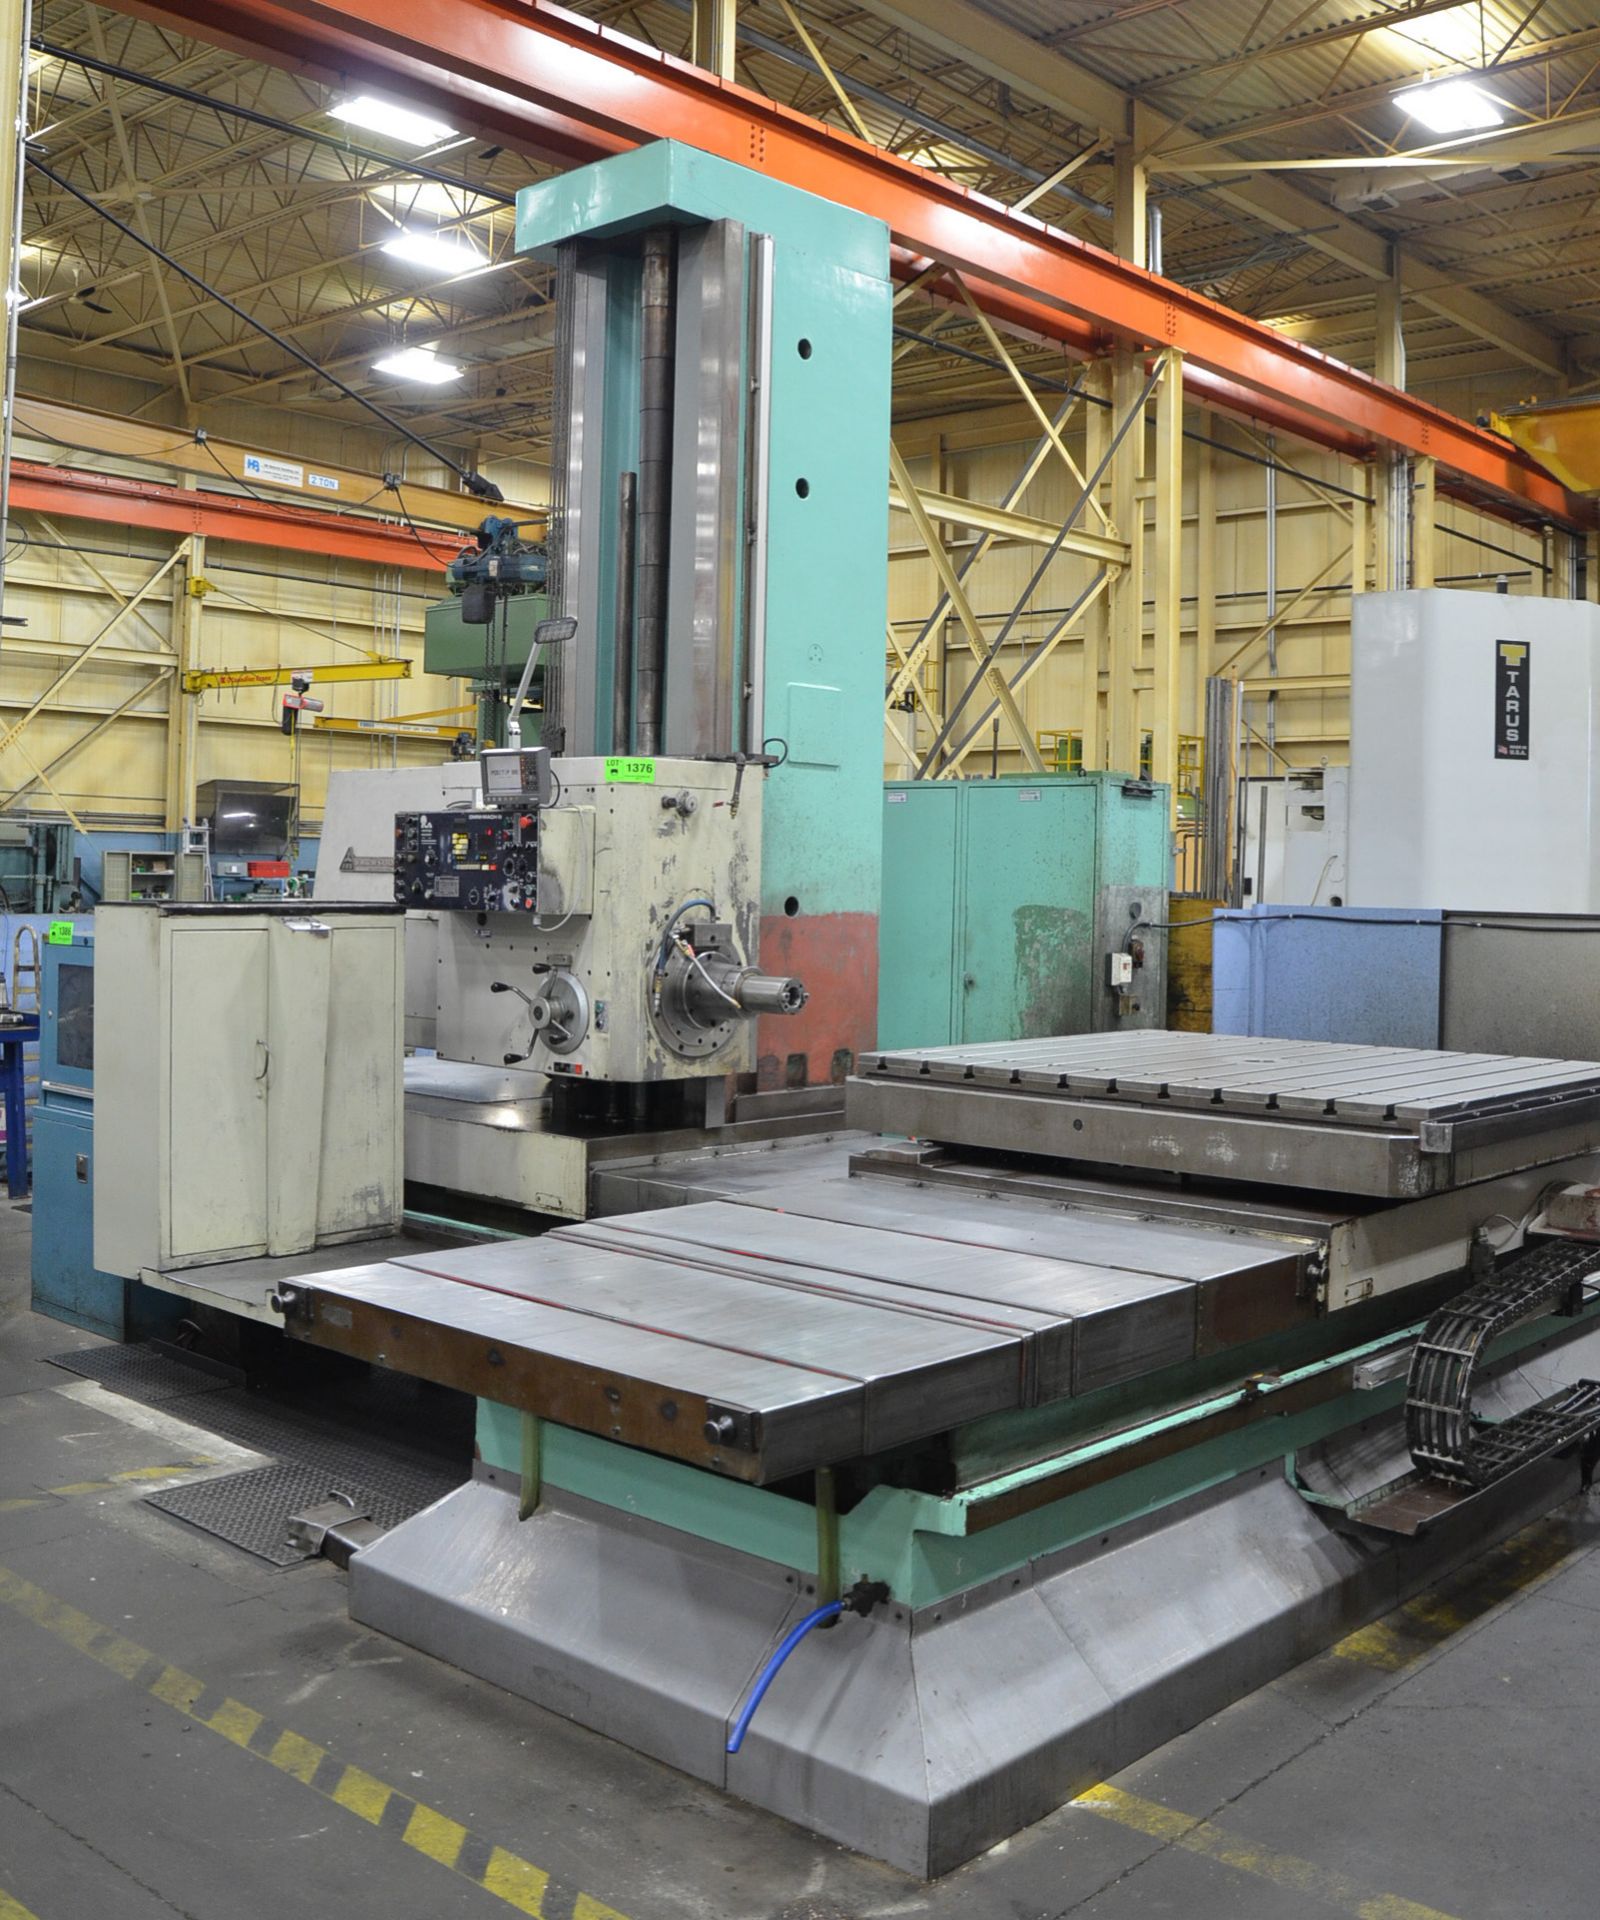 TOS WHN-13-4-A TABLE-TYPE HORIZONTAL BORING MILL WITH 5" SPINDLE, 63"X70.5" T-SLOT ROTARY TABLE, - Image 3 of 10